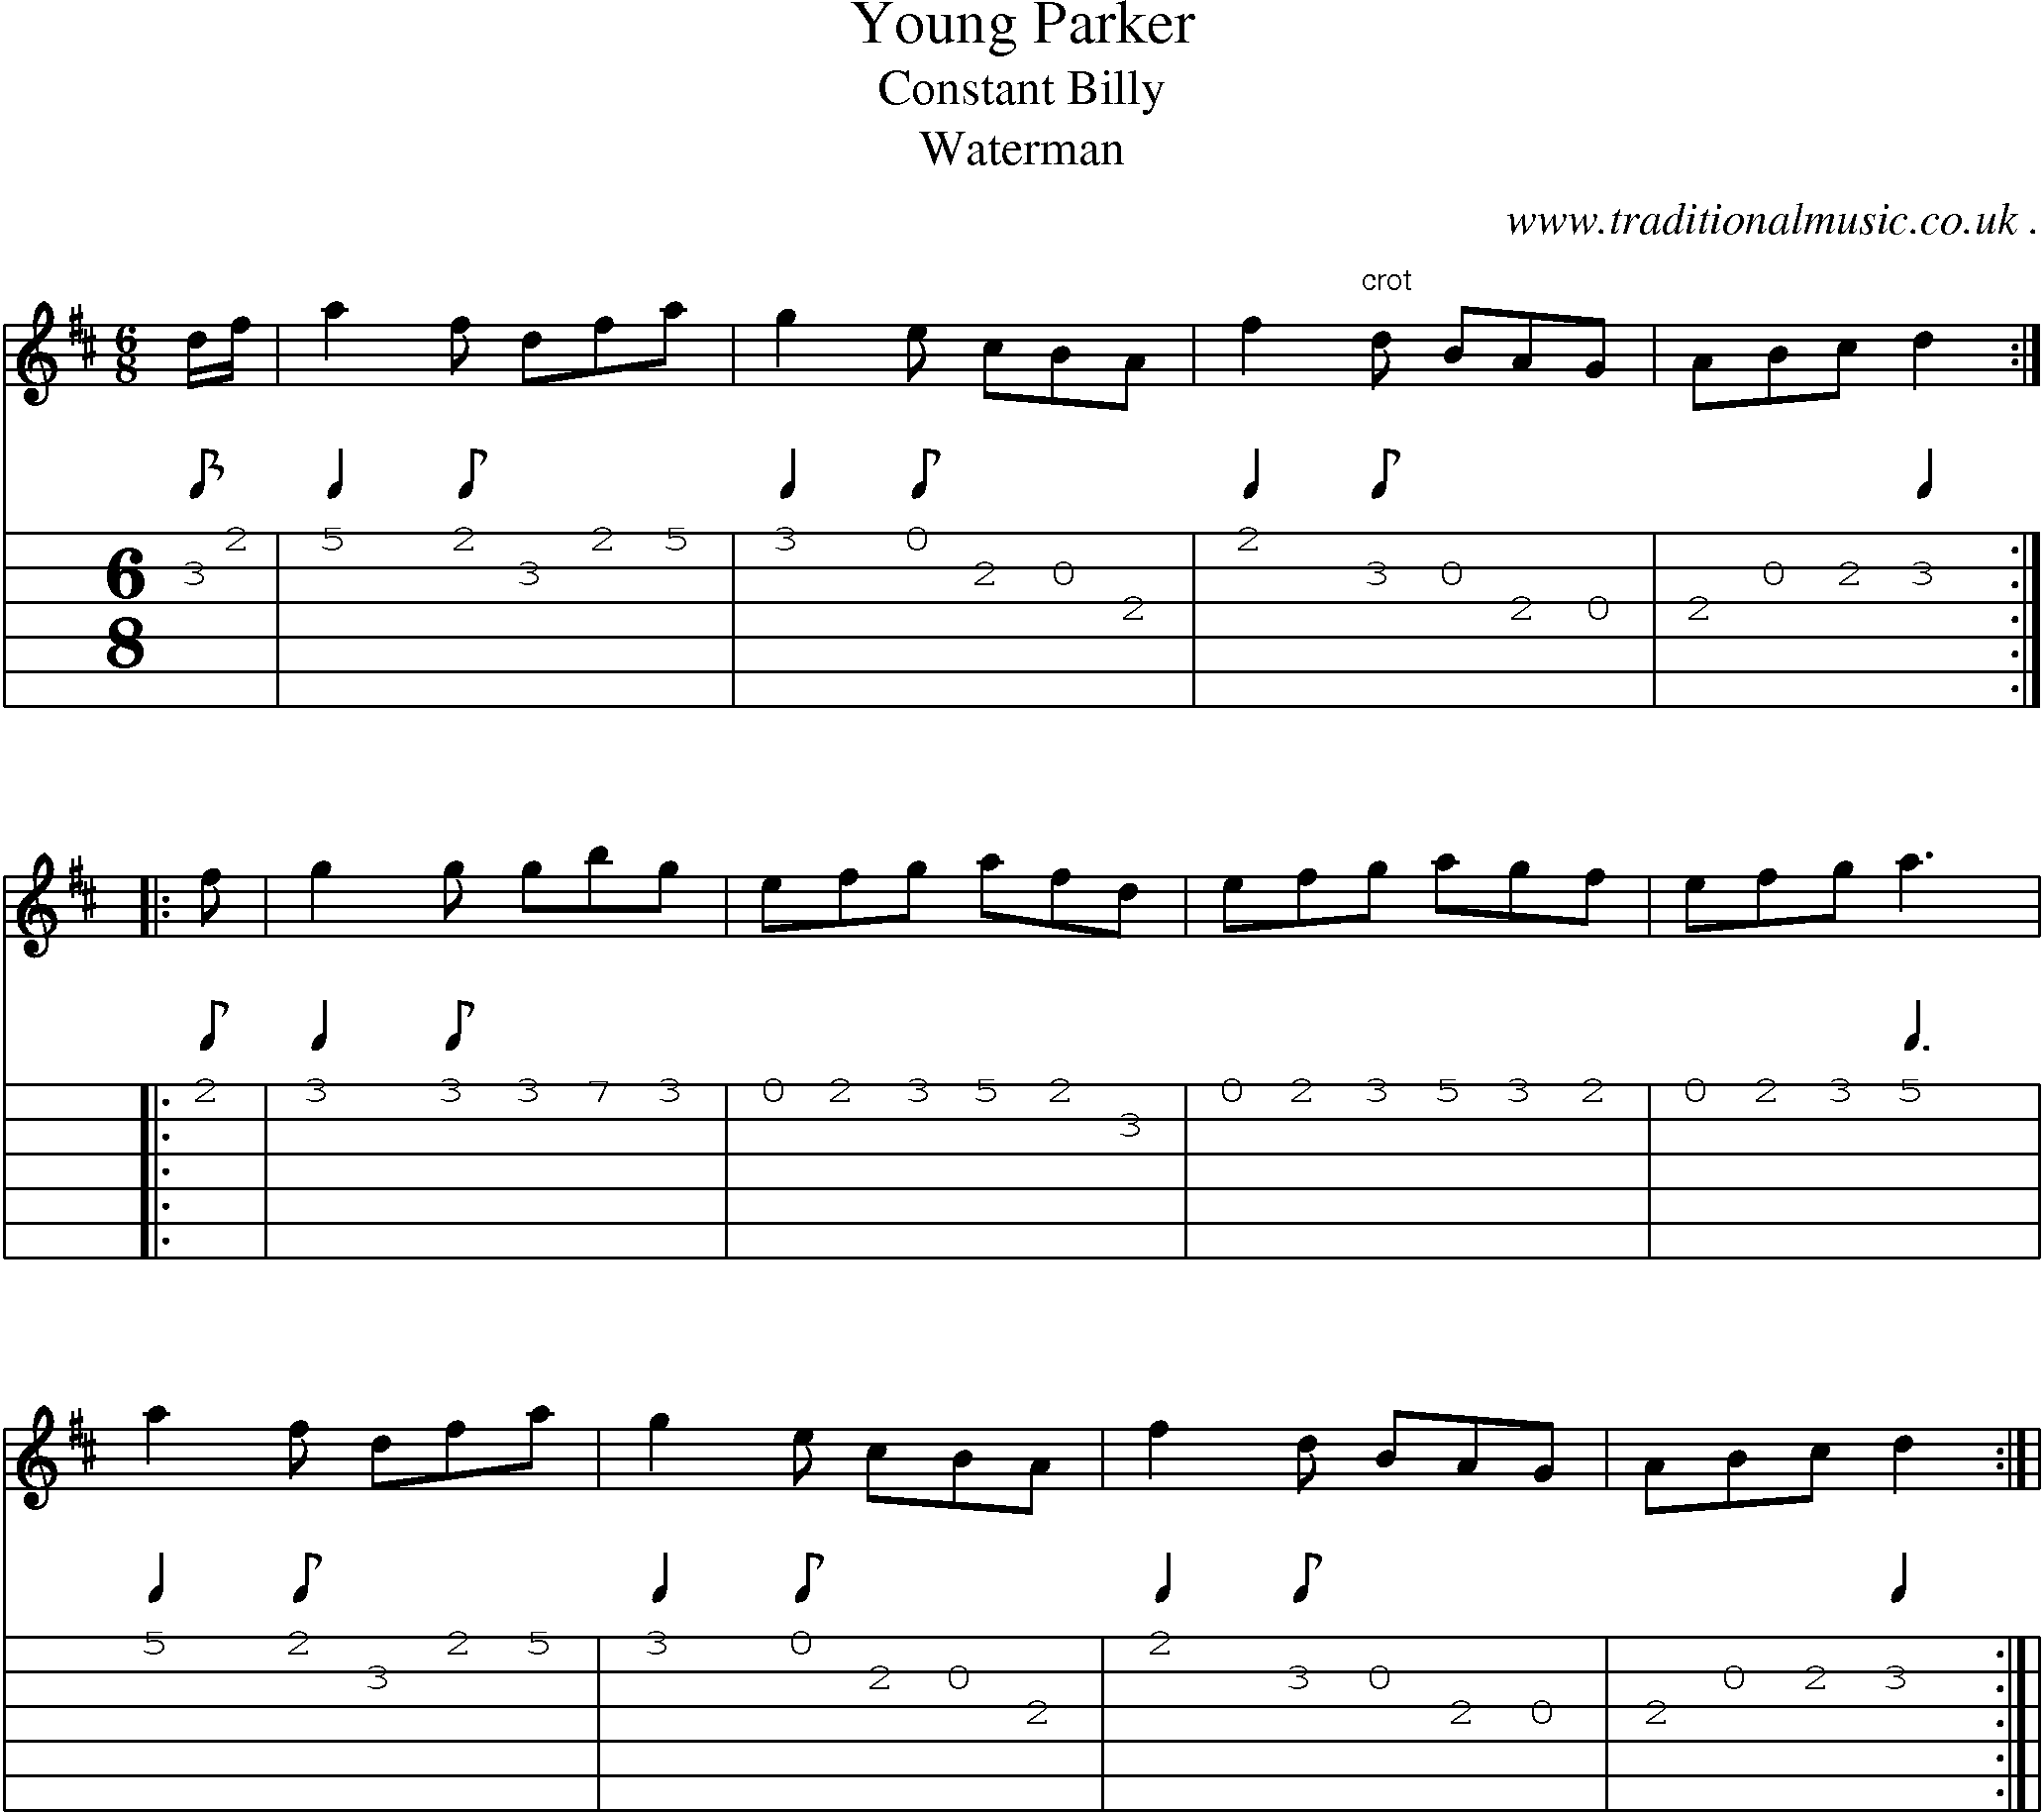 Sheet-Music and Guitar Tabs for Young Parker